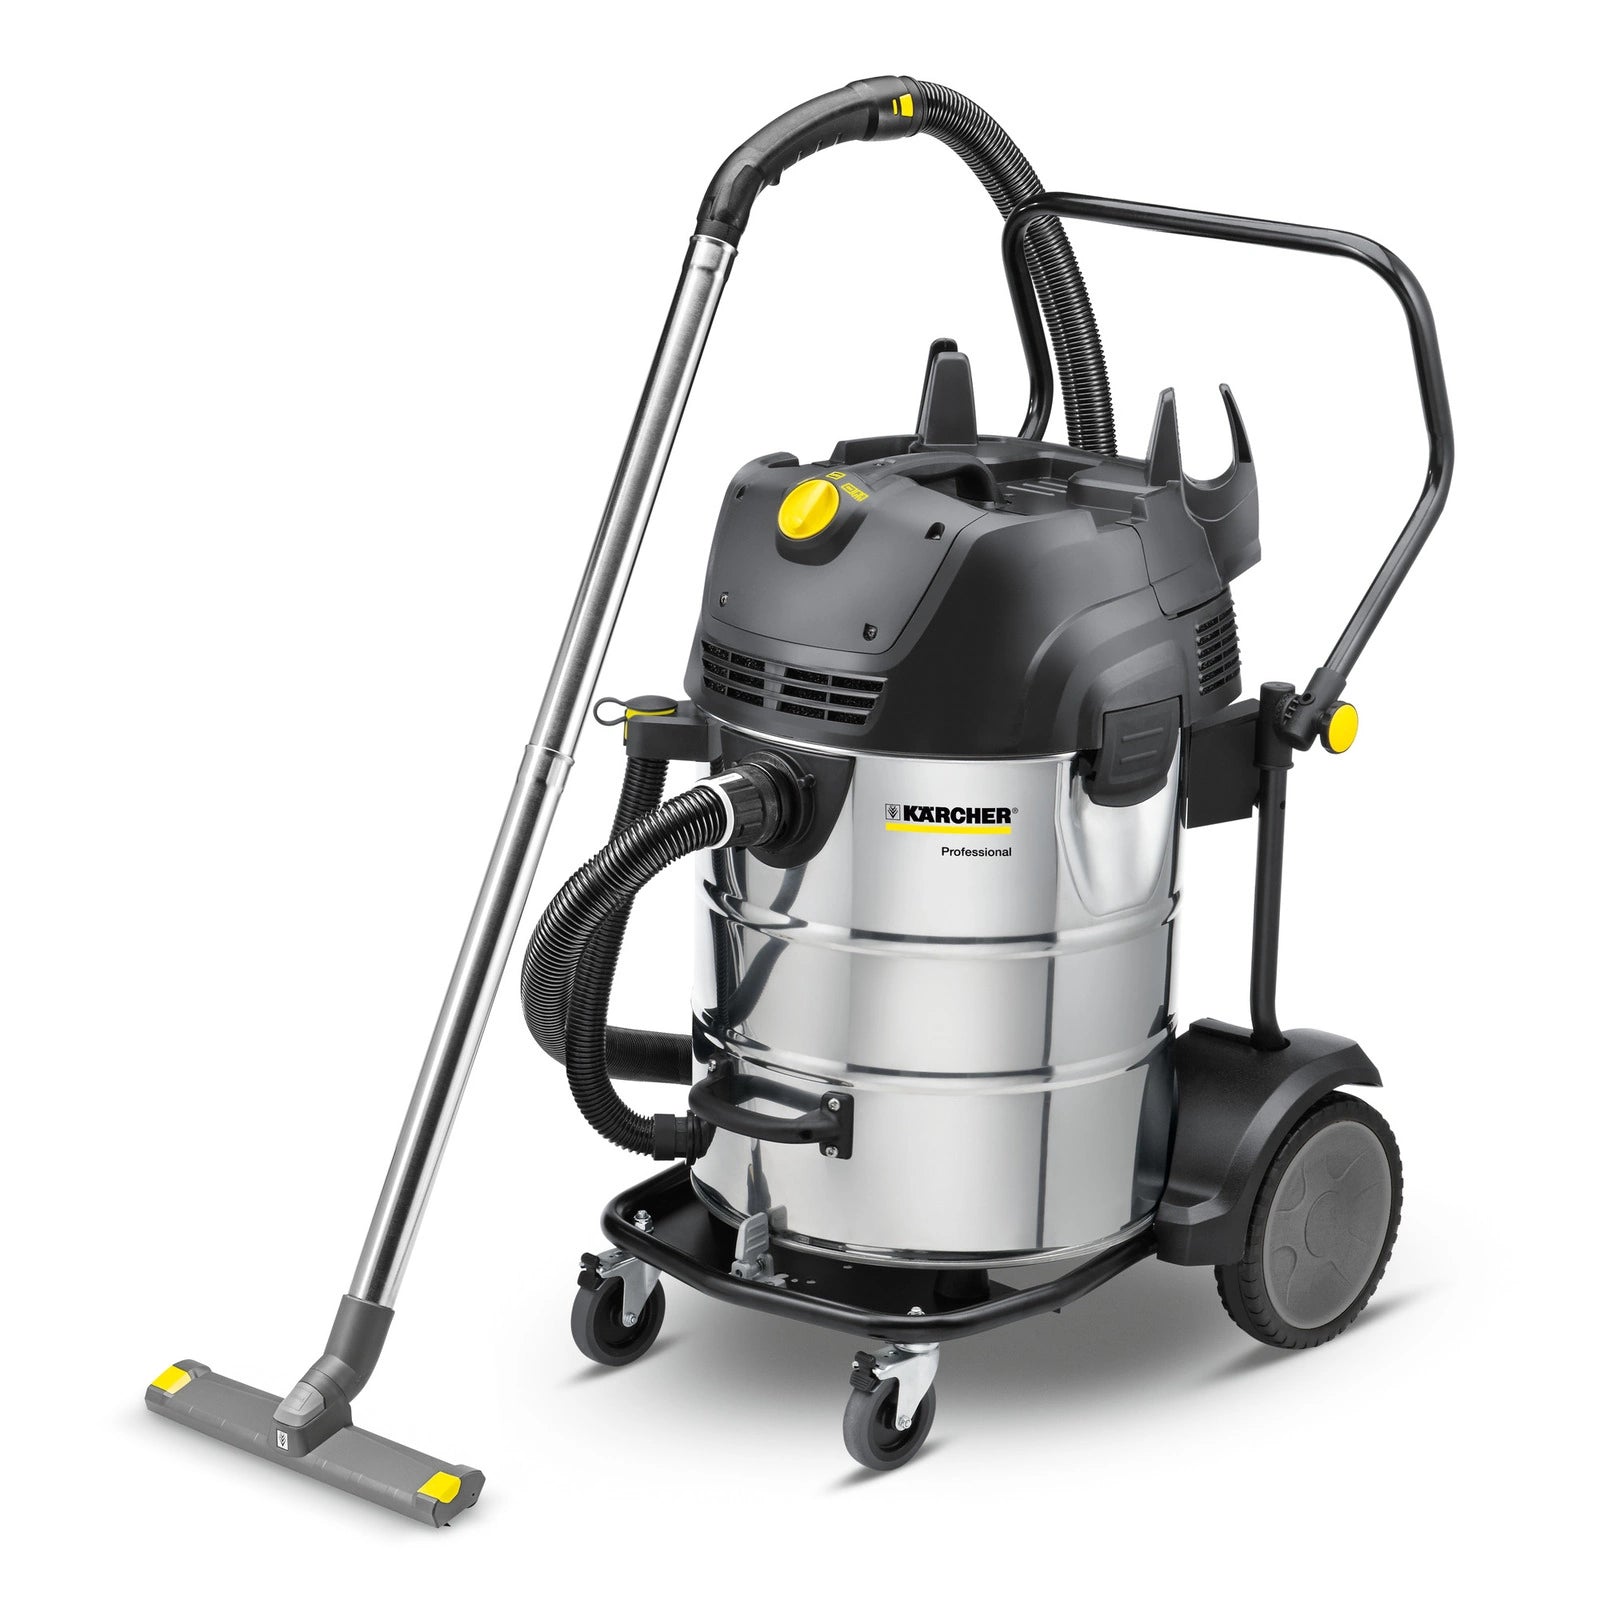 Kärcher wet and dry vacuum cleaner NT 75/2 Tact² Me Tc